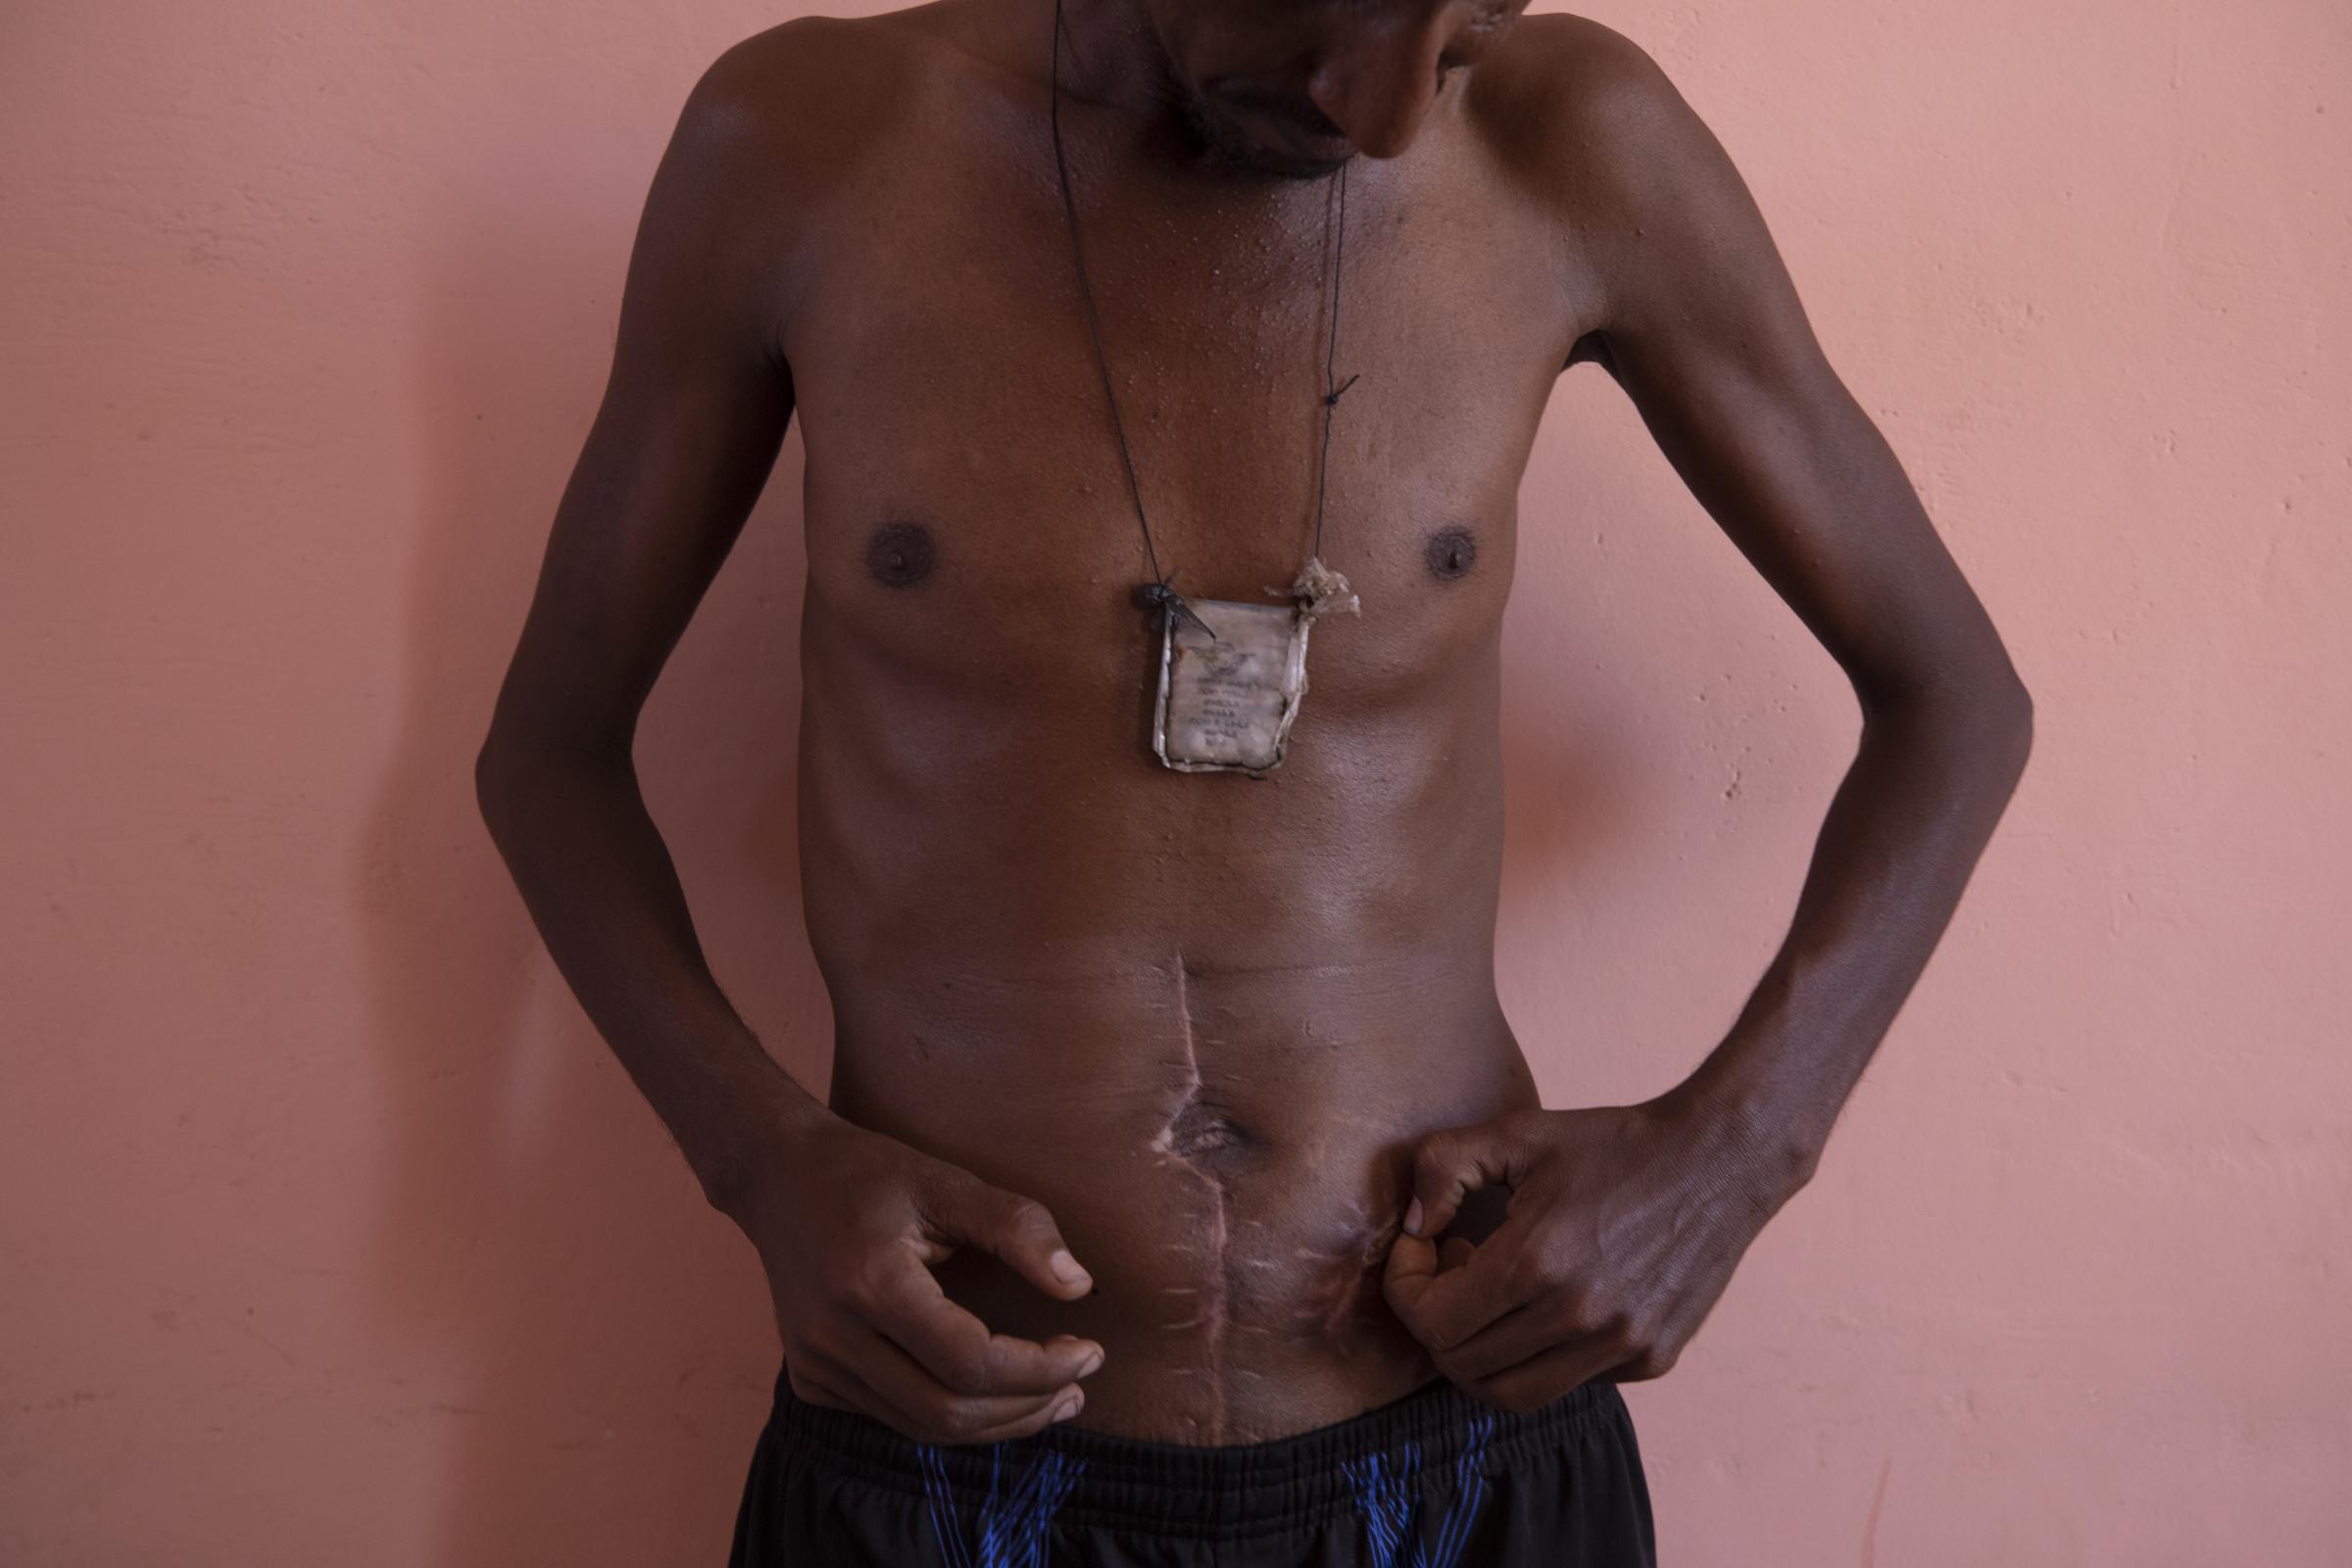 War forces thousands of Tigrayan's into Sudan - Nega Chekole, 30, from Humera, touches his stitched...